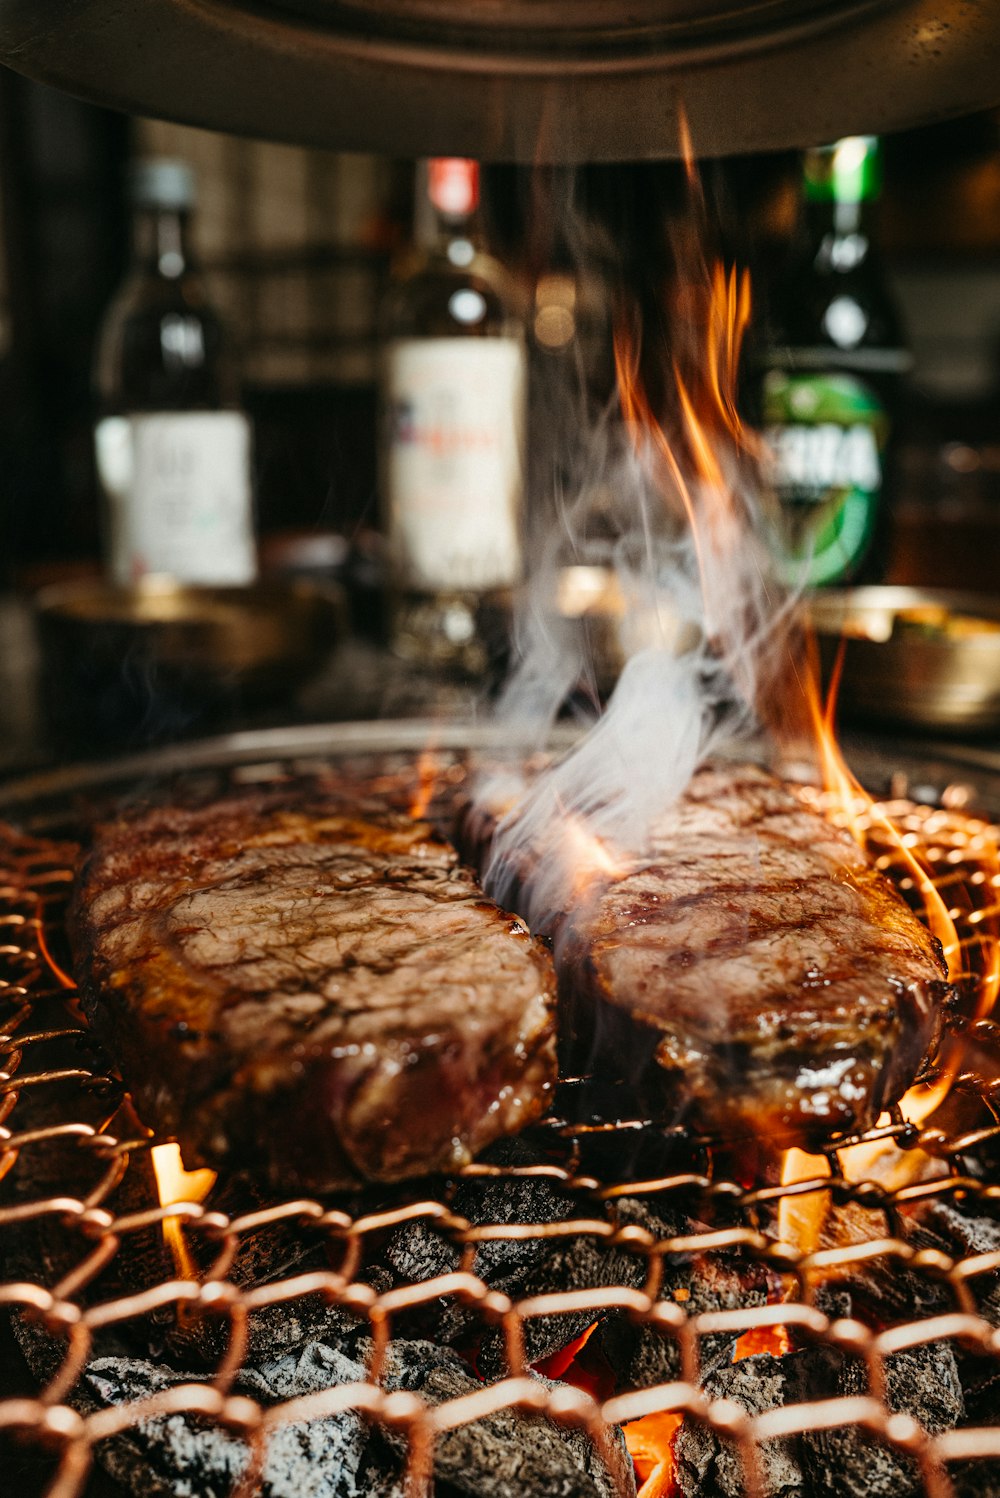 two steaks cooking on a grill with flames